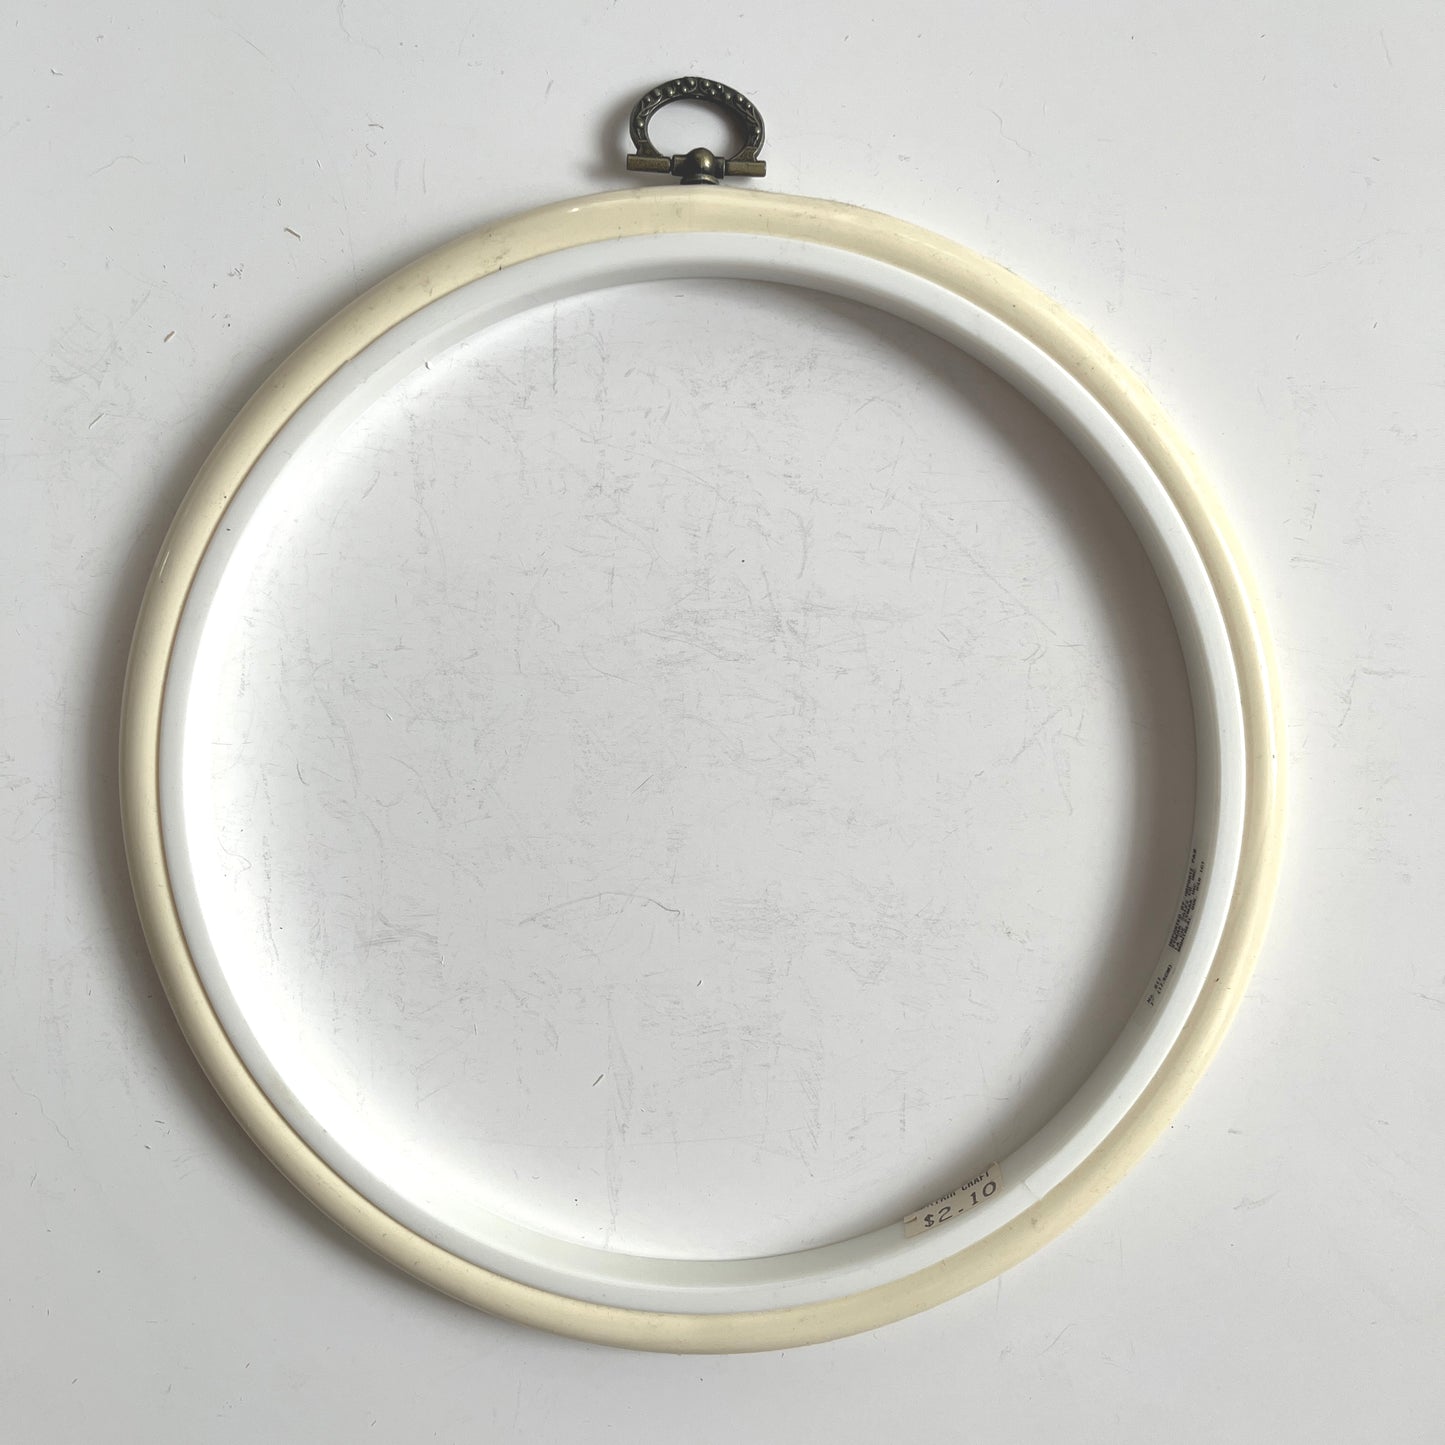 Random Embroidery Hoops - Vintage, thrifted, large sized, oval